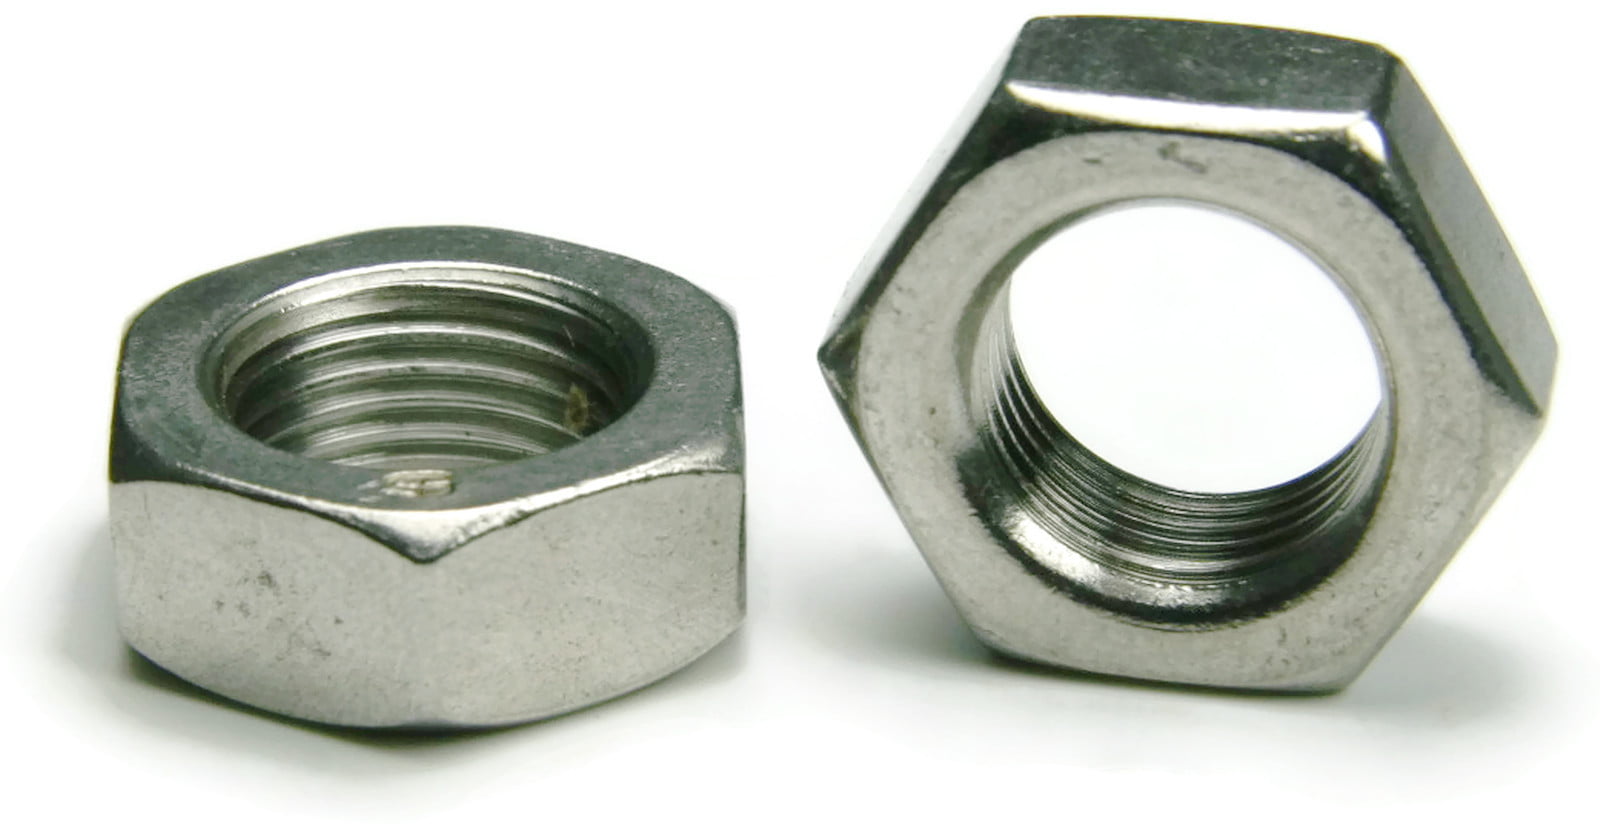 Stainless Steel thin jam half height Hex Nuts 3/8-16 Qty 100 